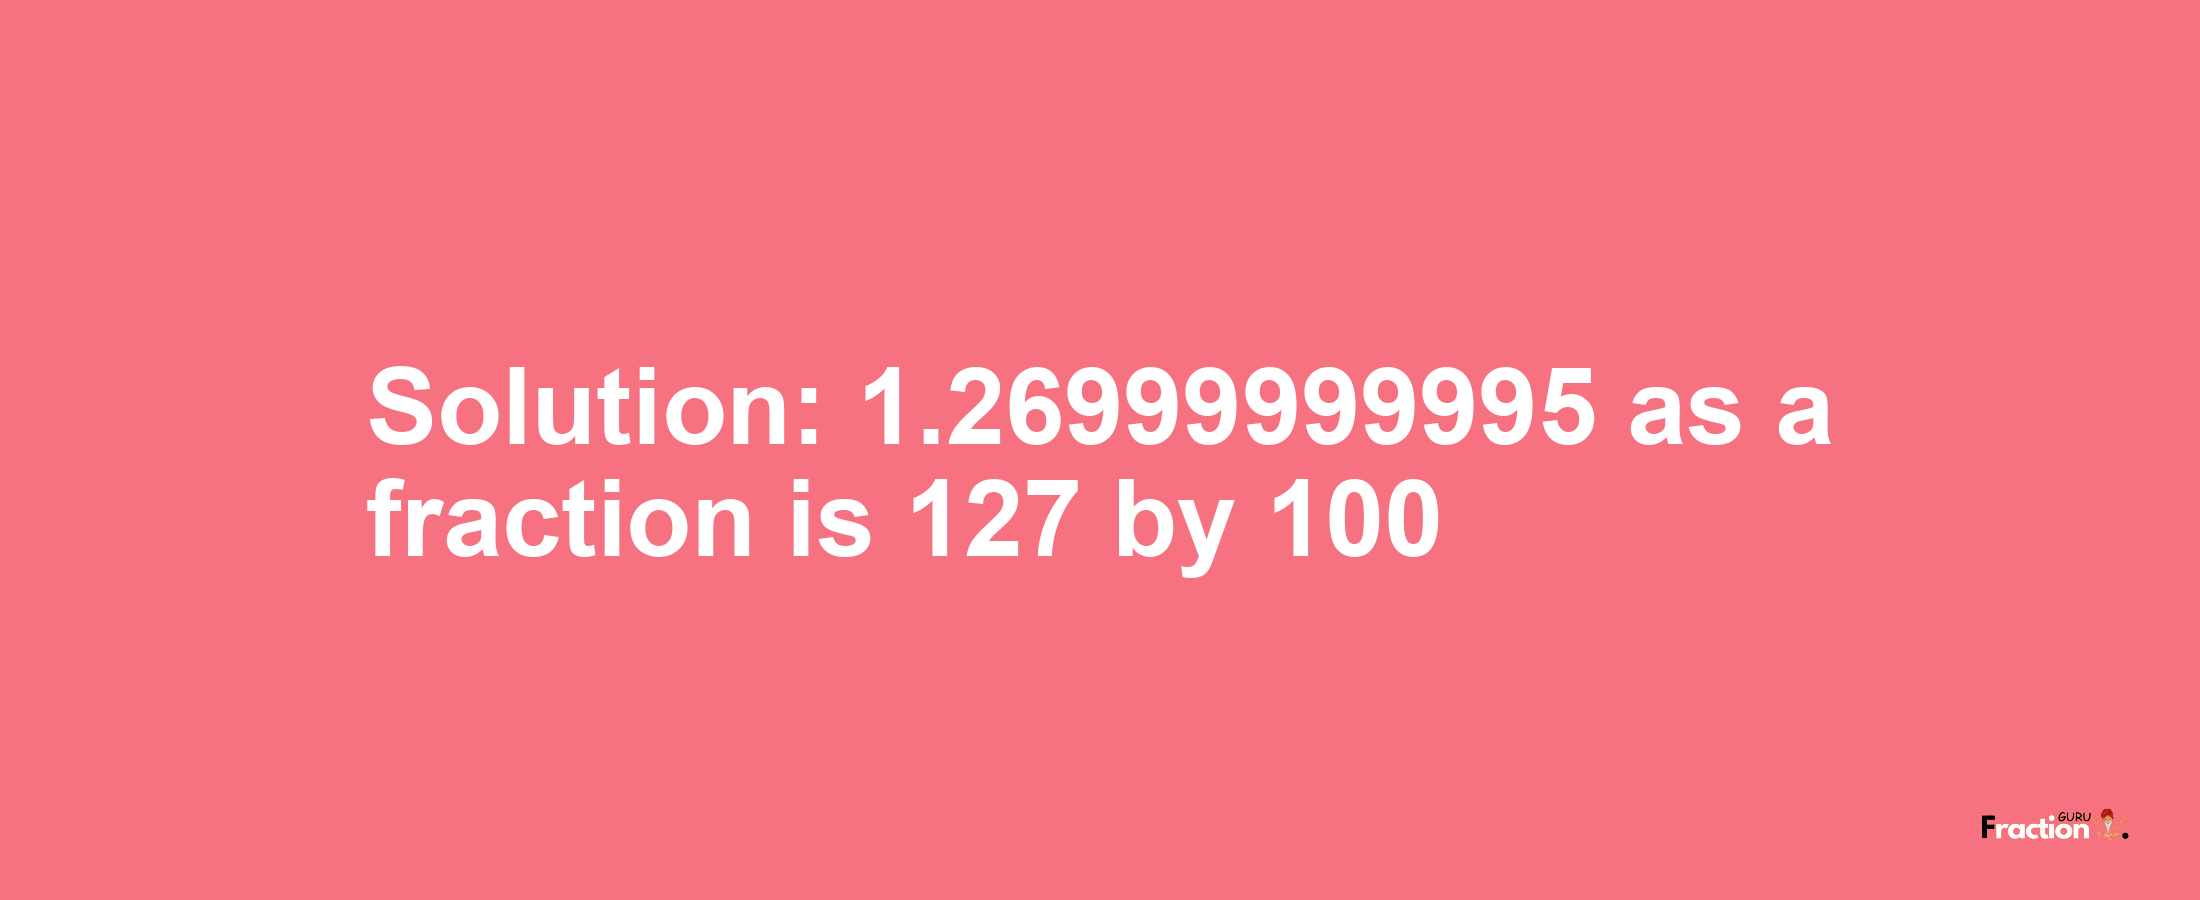 Solution:1.26999999995 as a fraction is 127/100